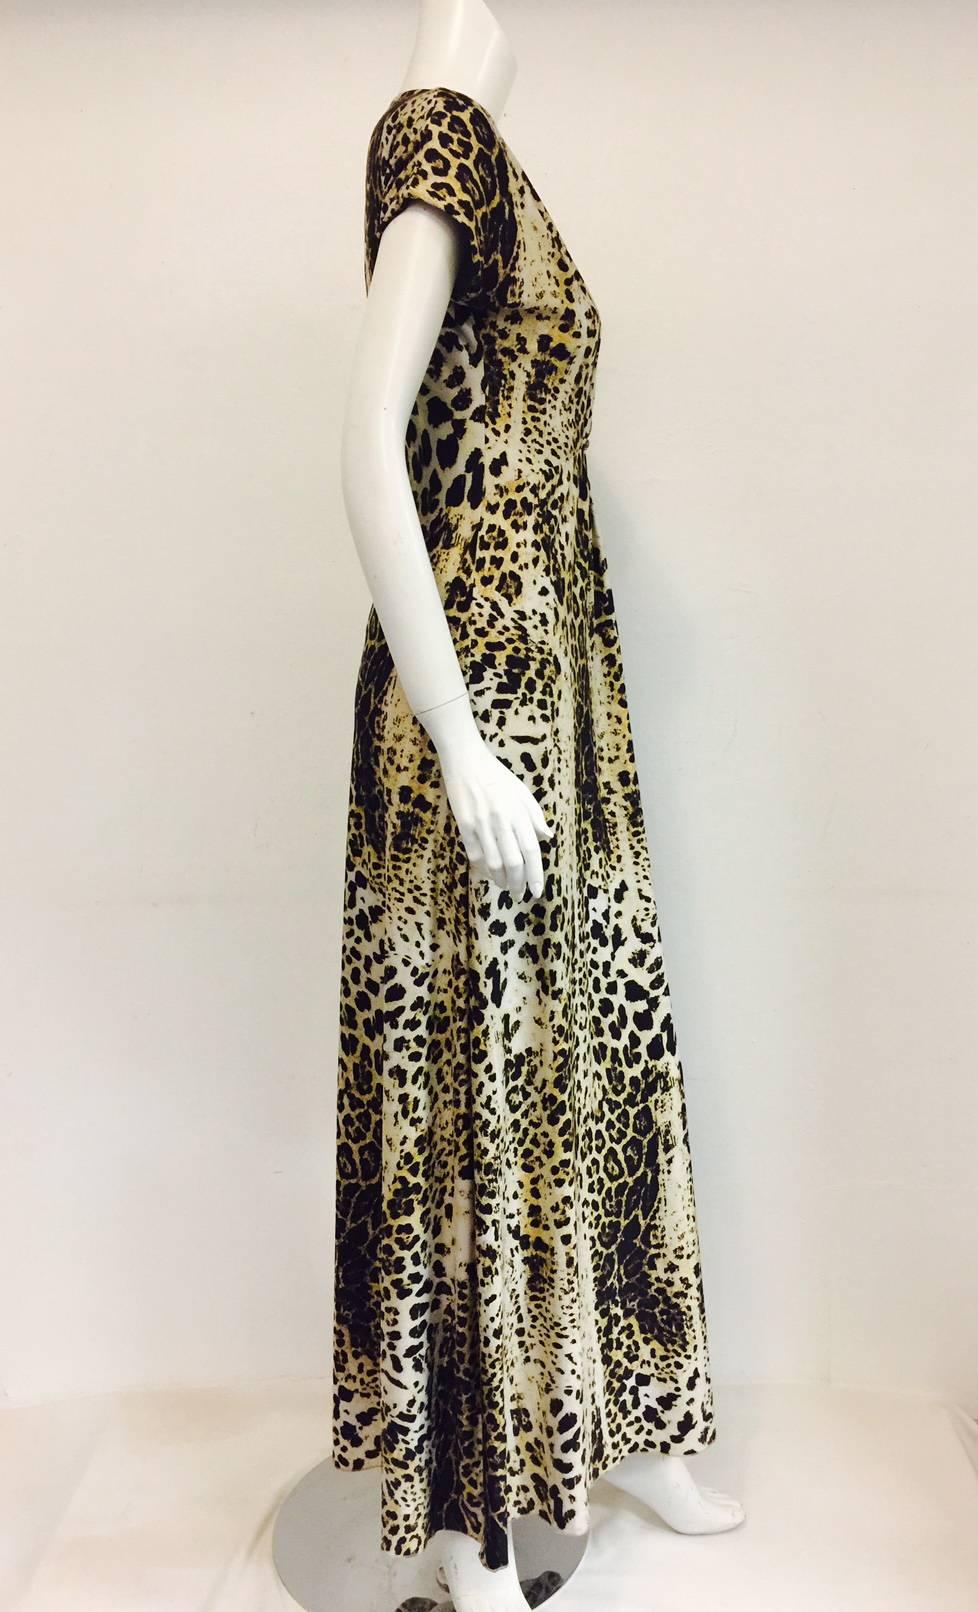 Roberto Cavalli Internationally renowned House of glamour and flamboyancy in all their designs, and this dress is no exception!  V neck, dropped sleeves, quasi empire waist with 2 bronze tone ornaments at gathering, informal yet dramatic a la